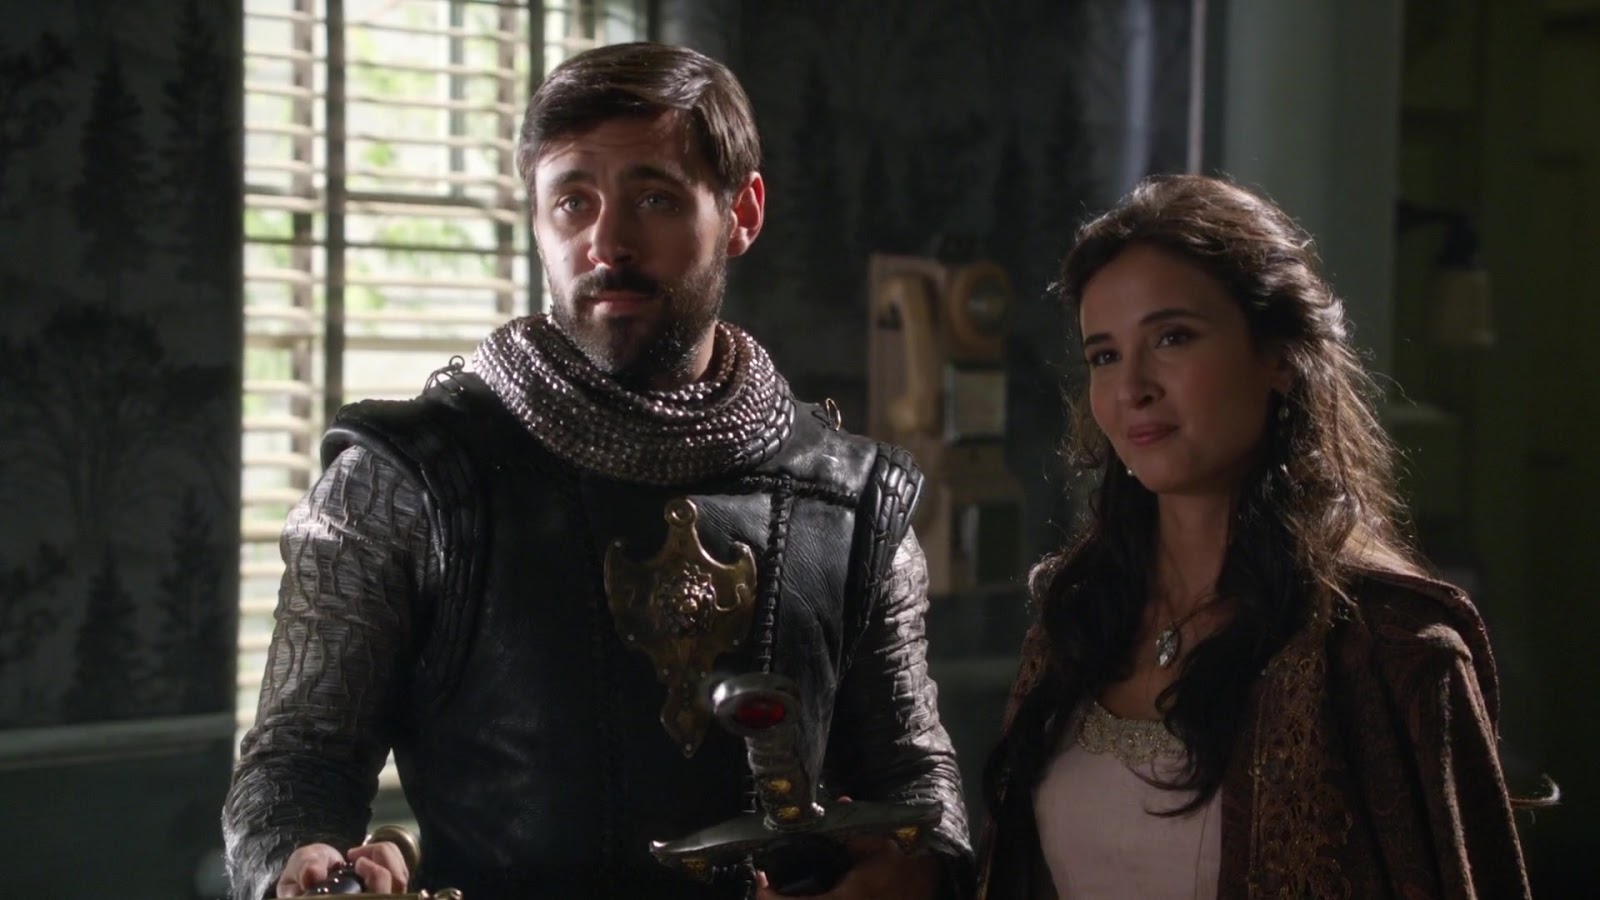 Once Upon A Time Season 5 Episodes 3 And 4 Review The Hunchblog Of Notre Dame 1763